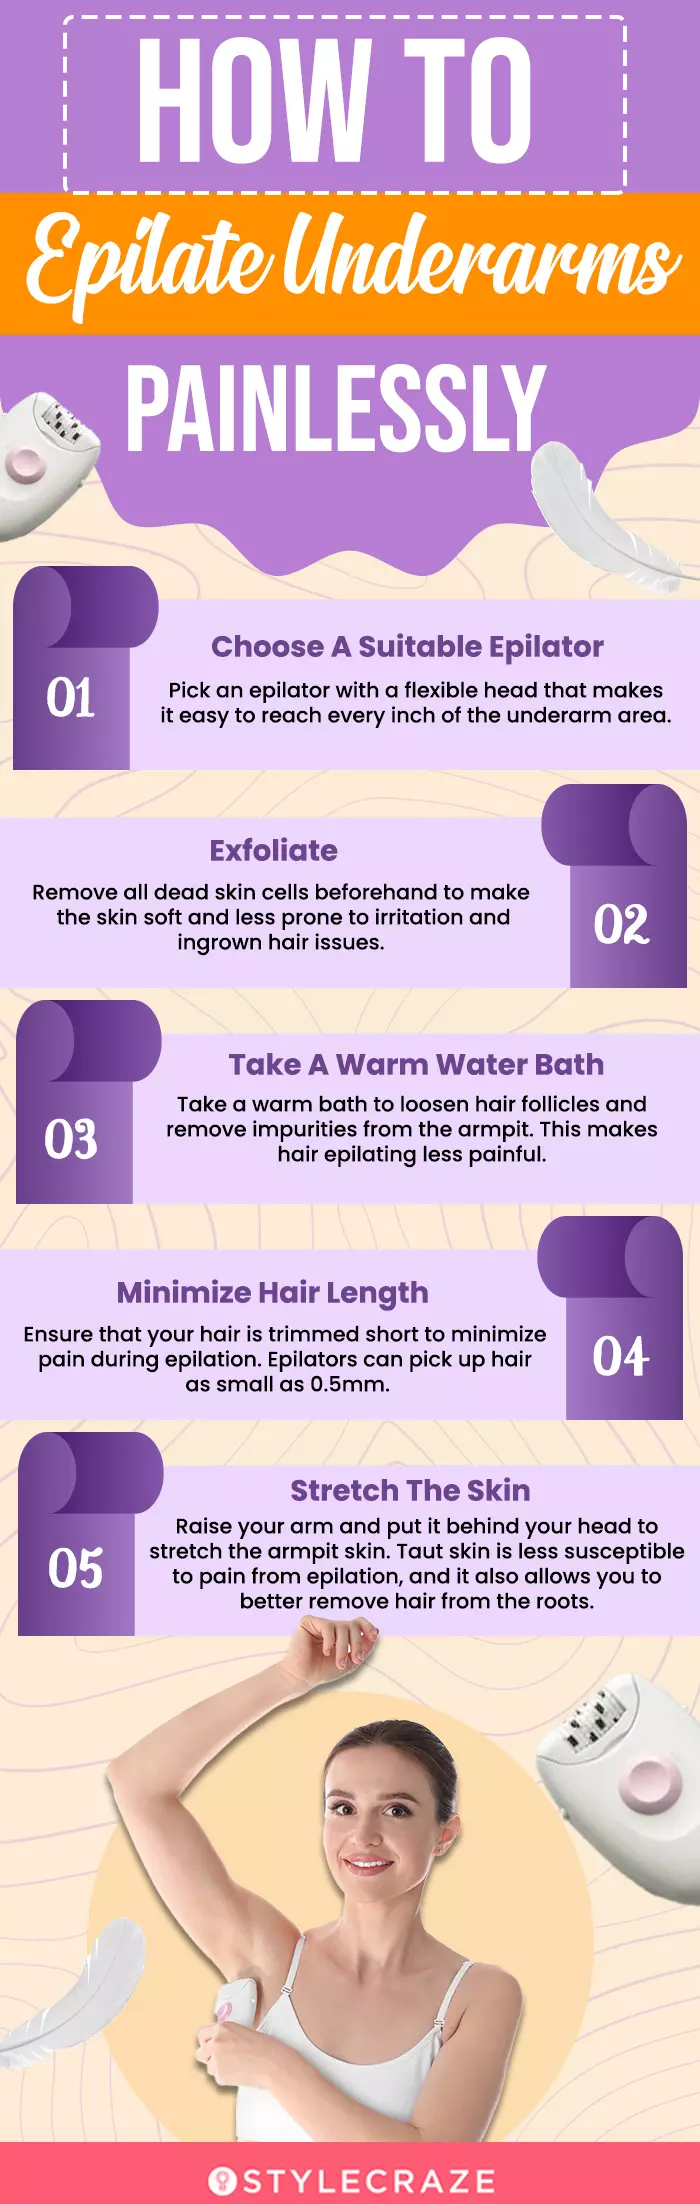 How To Epilate Underarms Painlessly (infographic)